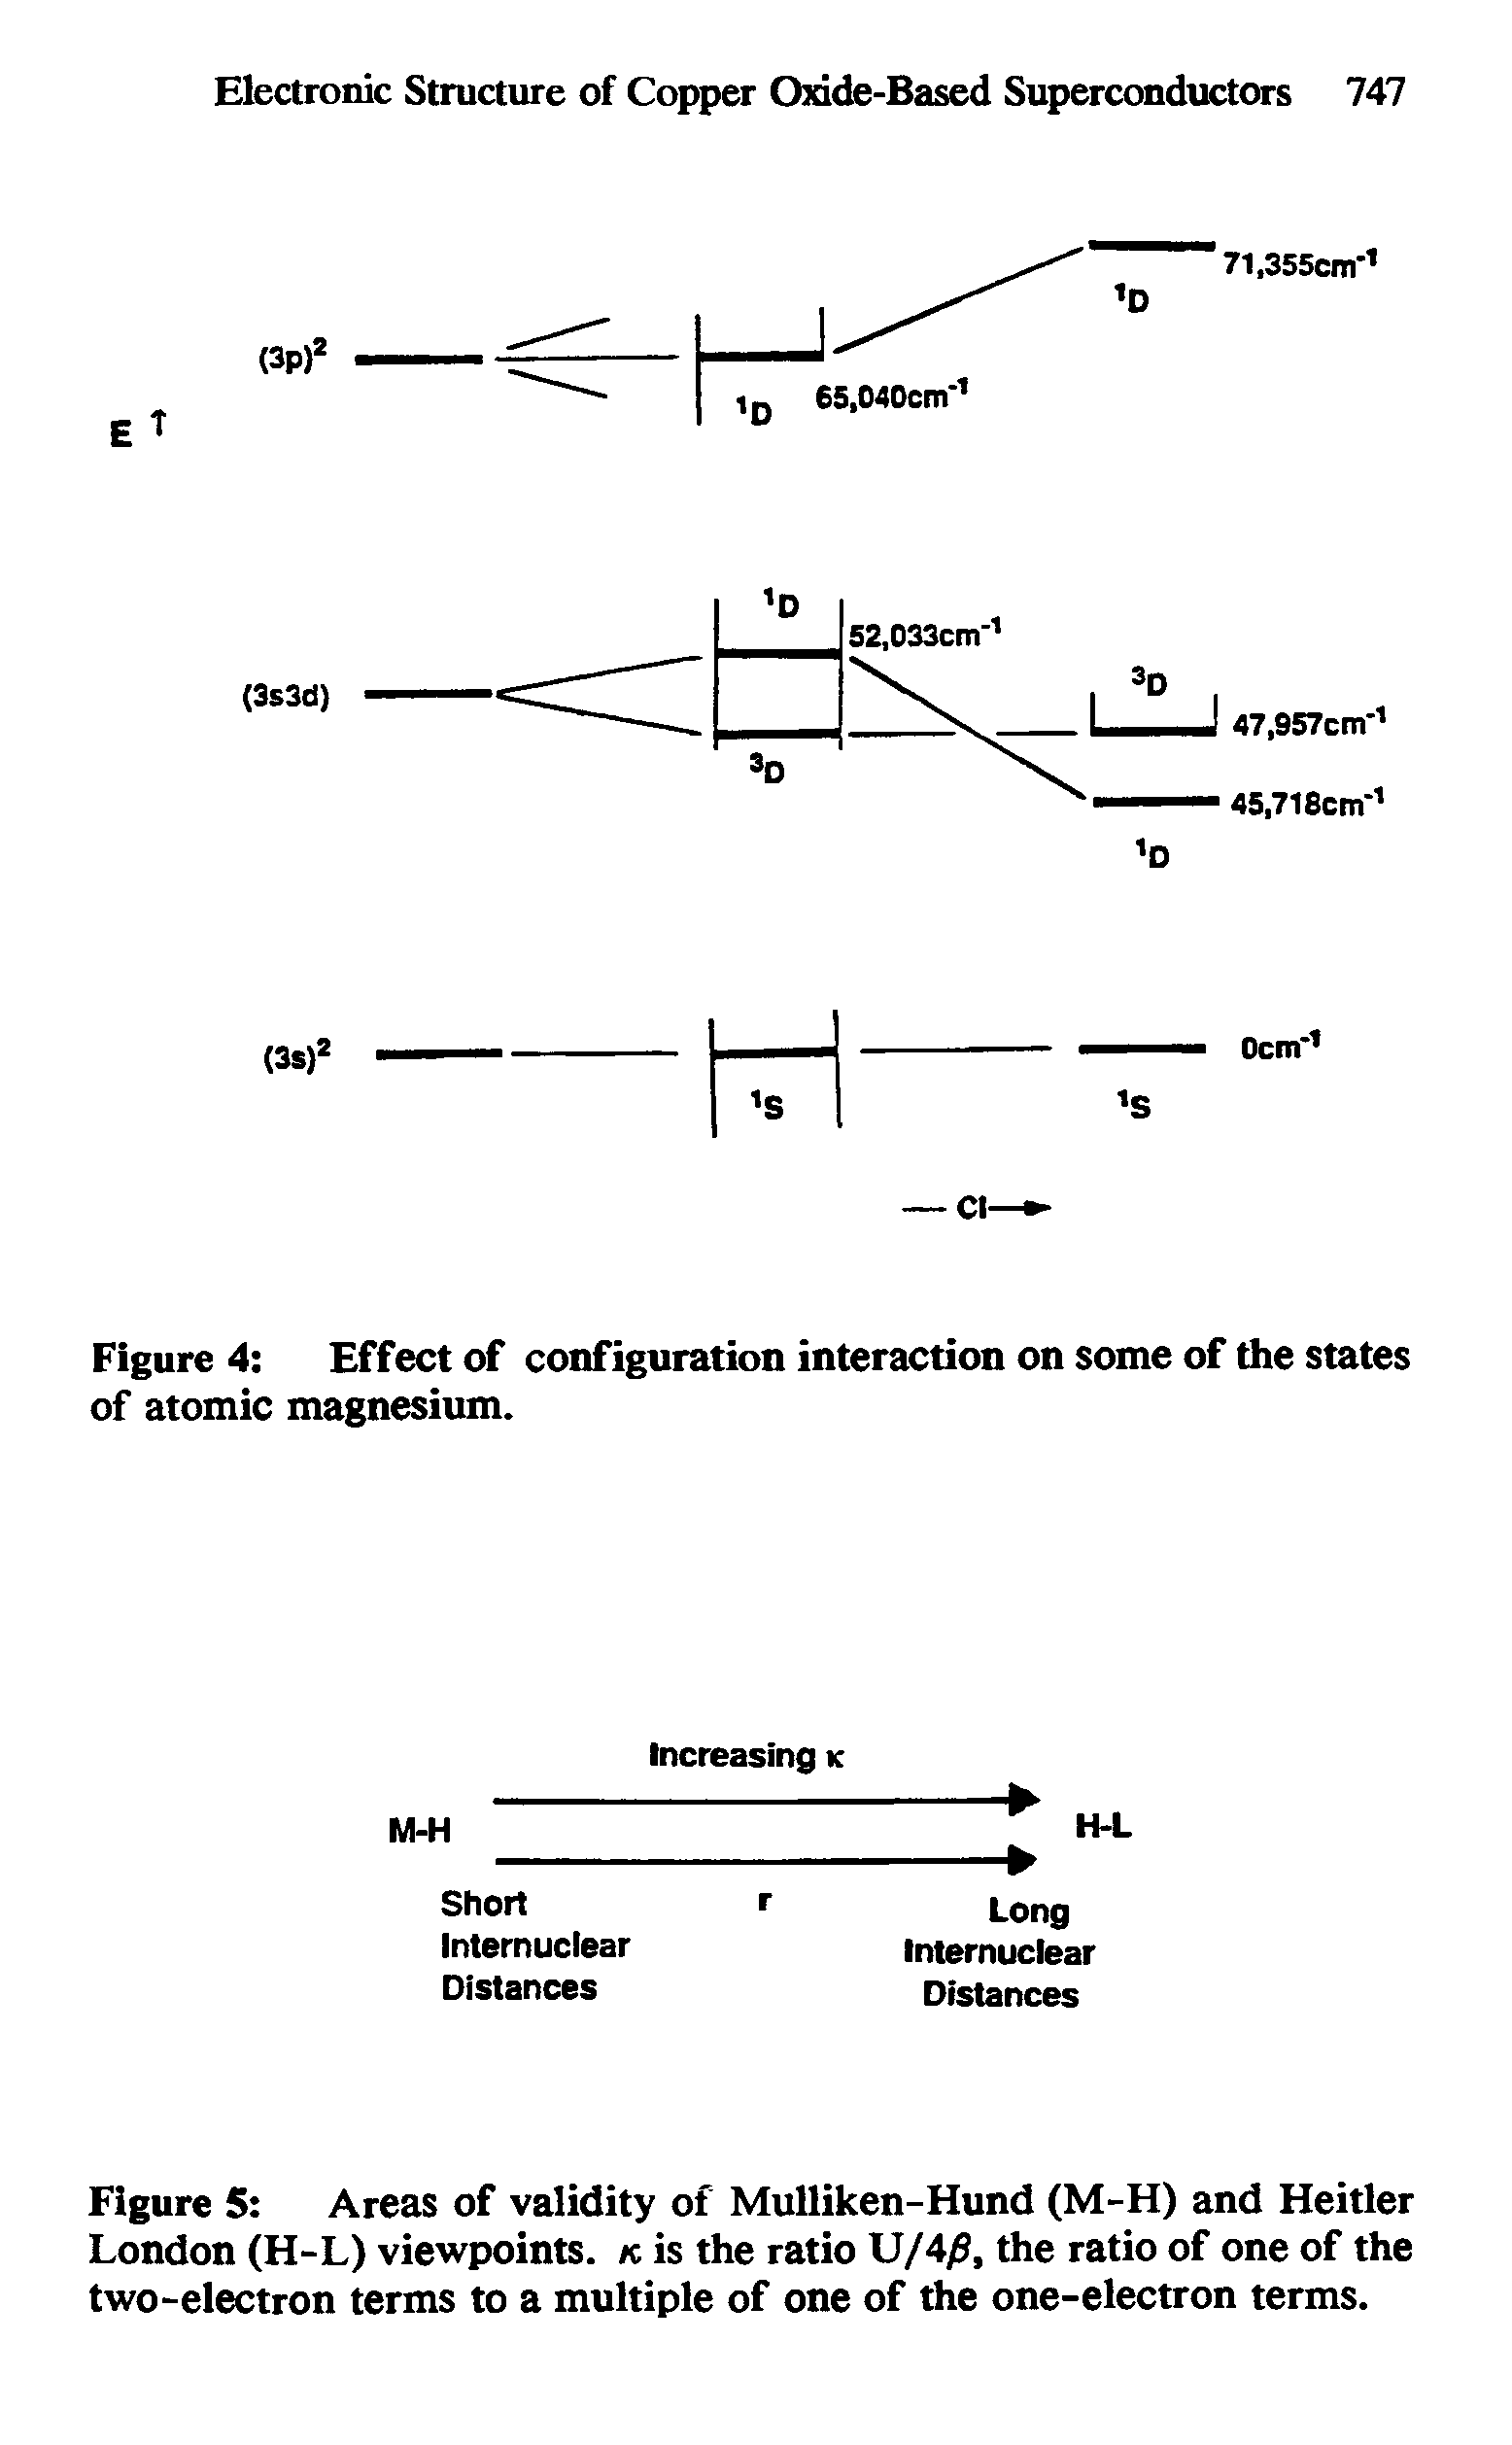 Figure 5 Areas of validity of Mulliken-Hund (M-H) and Heitler London (H-L) viewpoints, k is the ratio U/4/J, the ratio of one of the two-electron terms to a multiple of one of the one-electron terms.